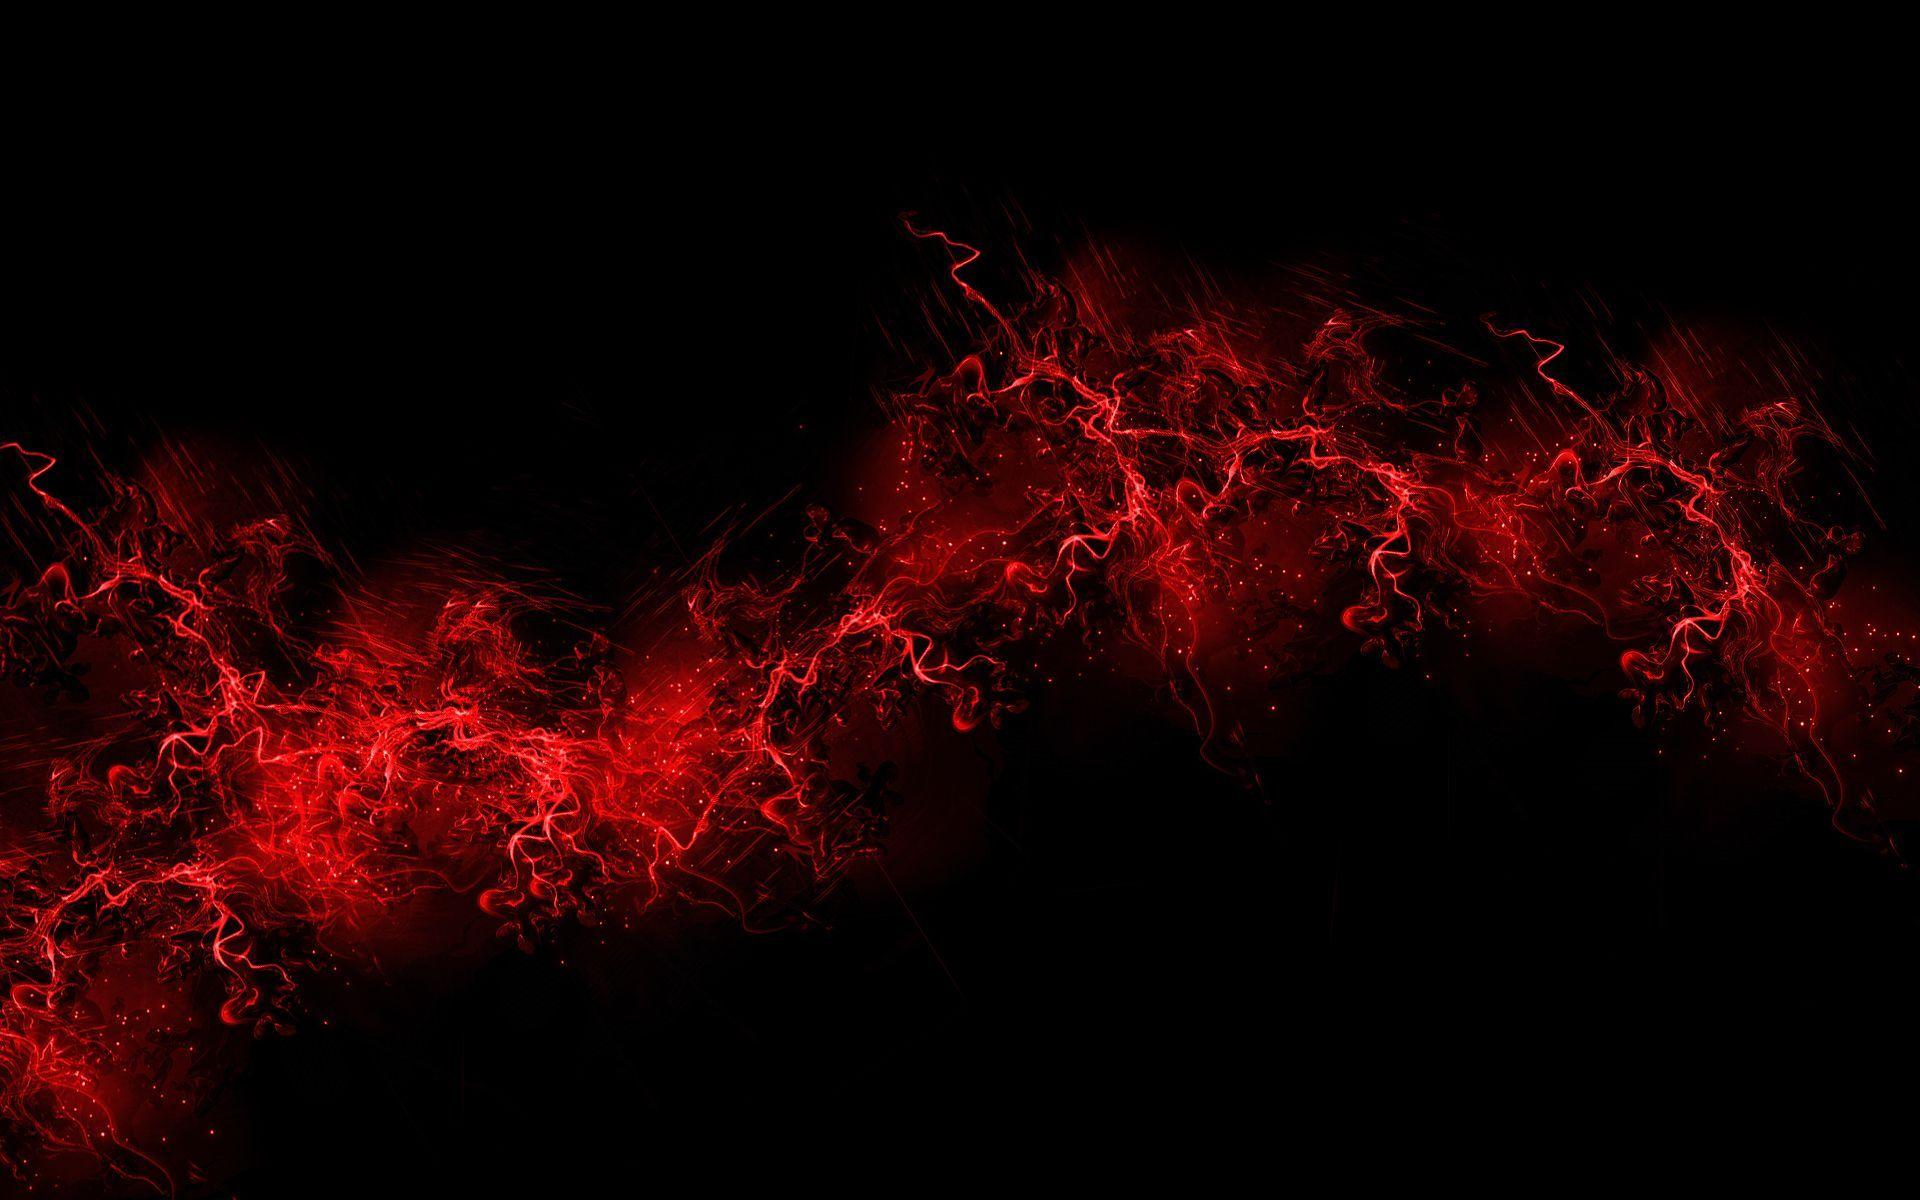 Dark Red Photos Download The BEST Free Dark Red Stock Photos  HD Images